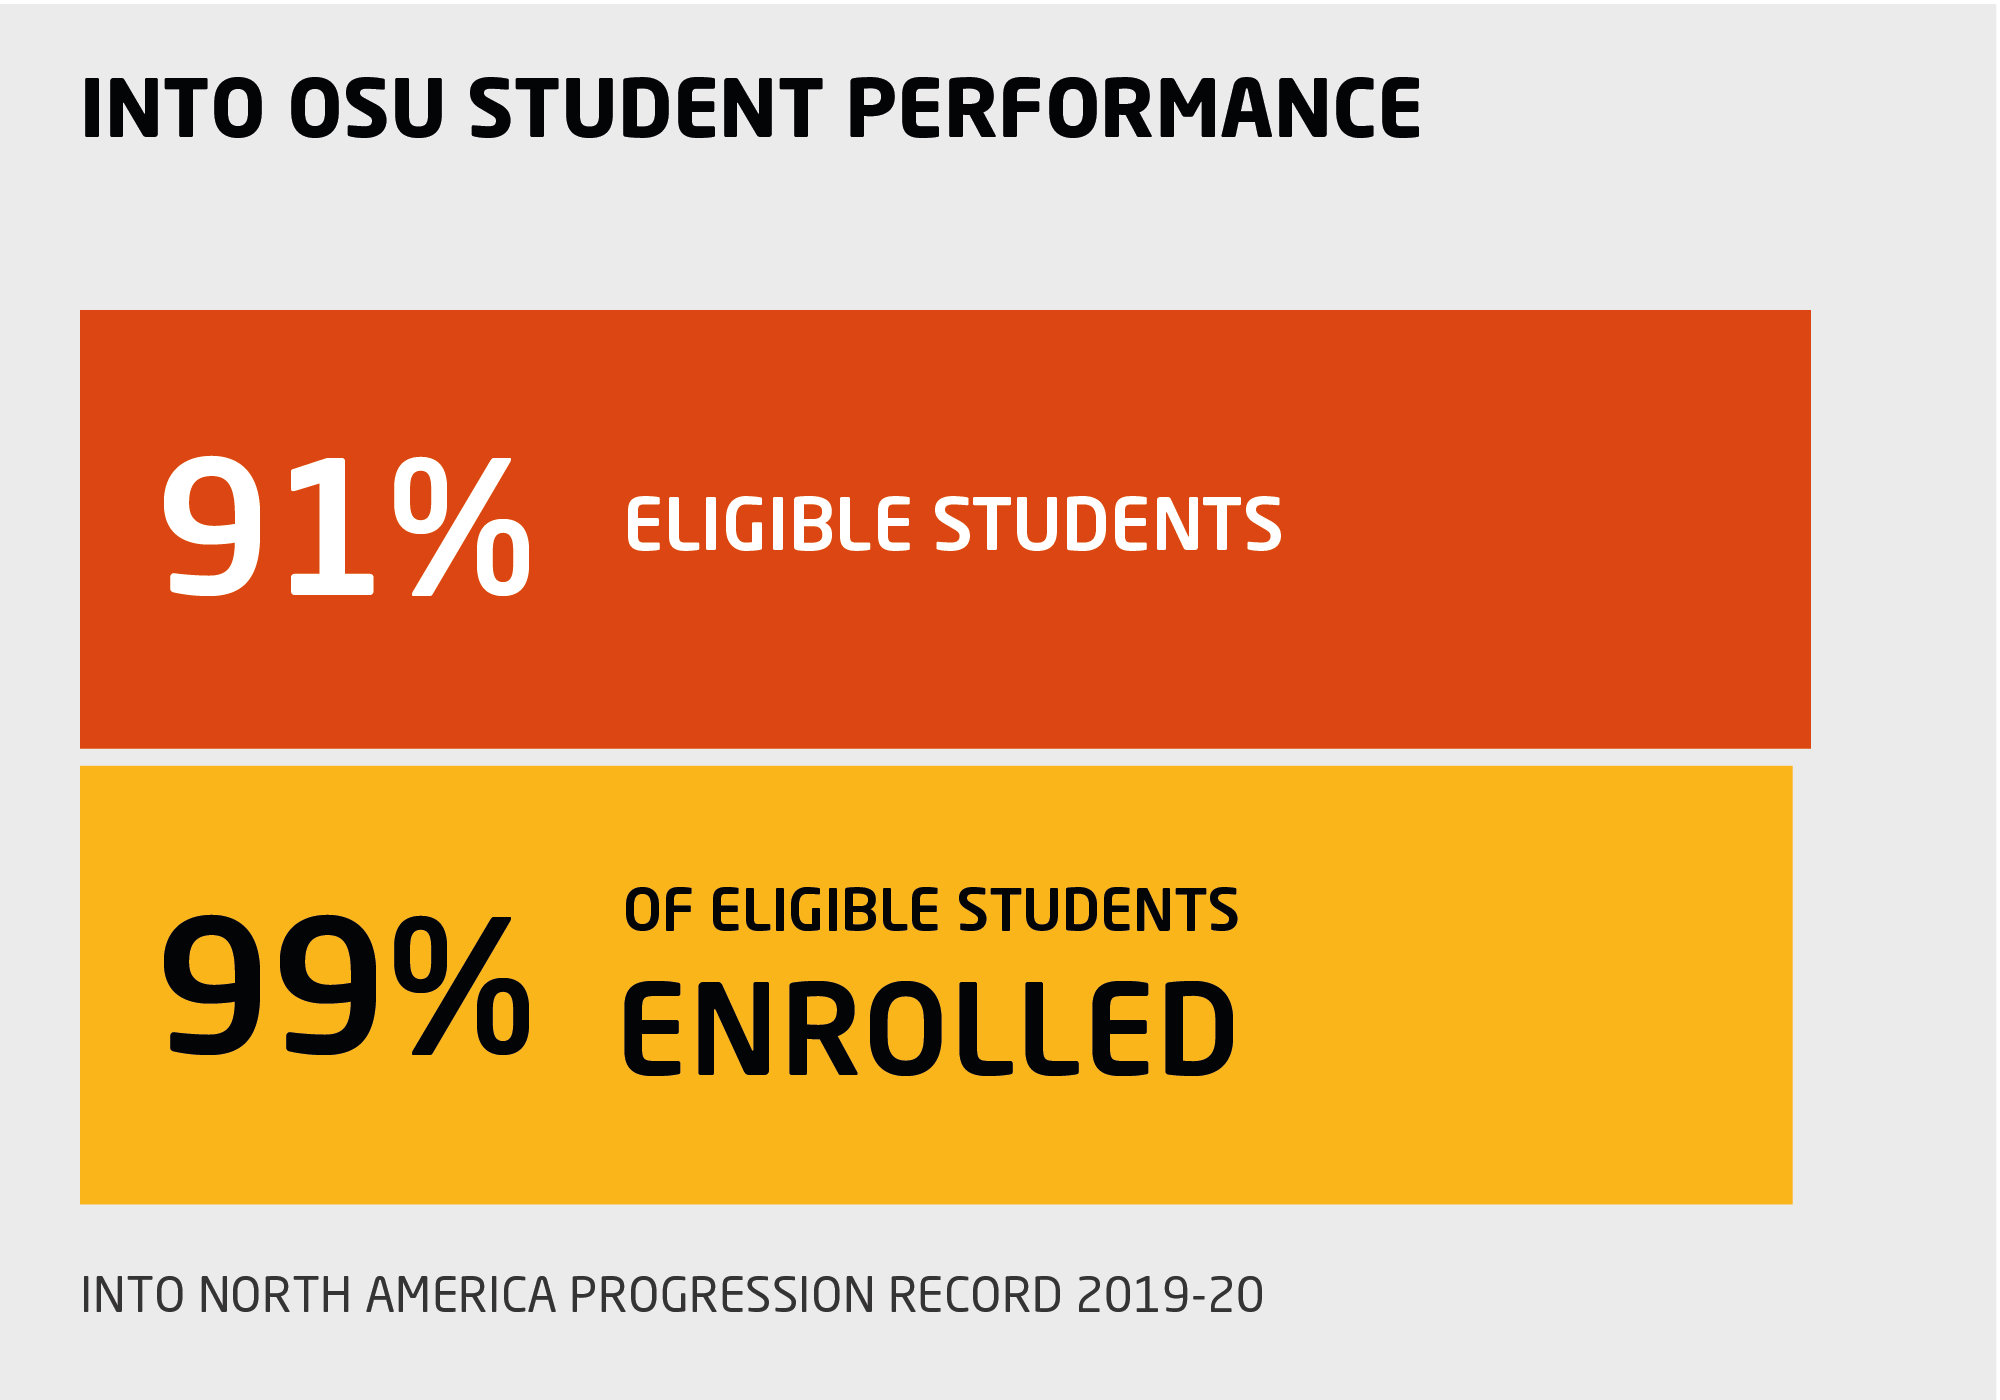 Infographic showing INTO Oregon State University student performance, with 91% of students eligible to progress to OSU degree programs after Pathway, and 99% of those eligible enrolling.